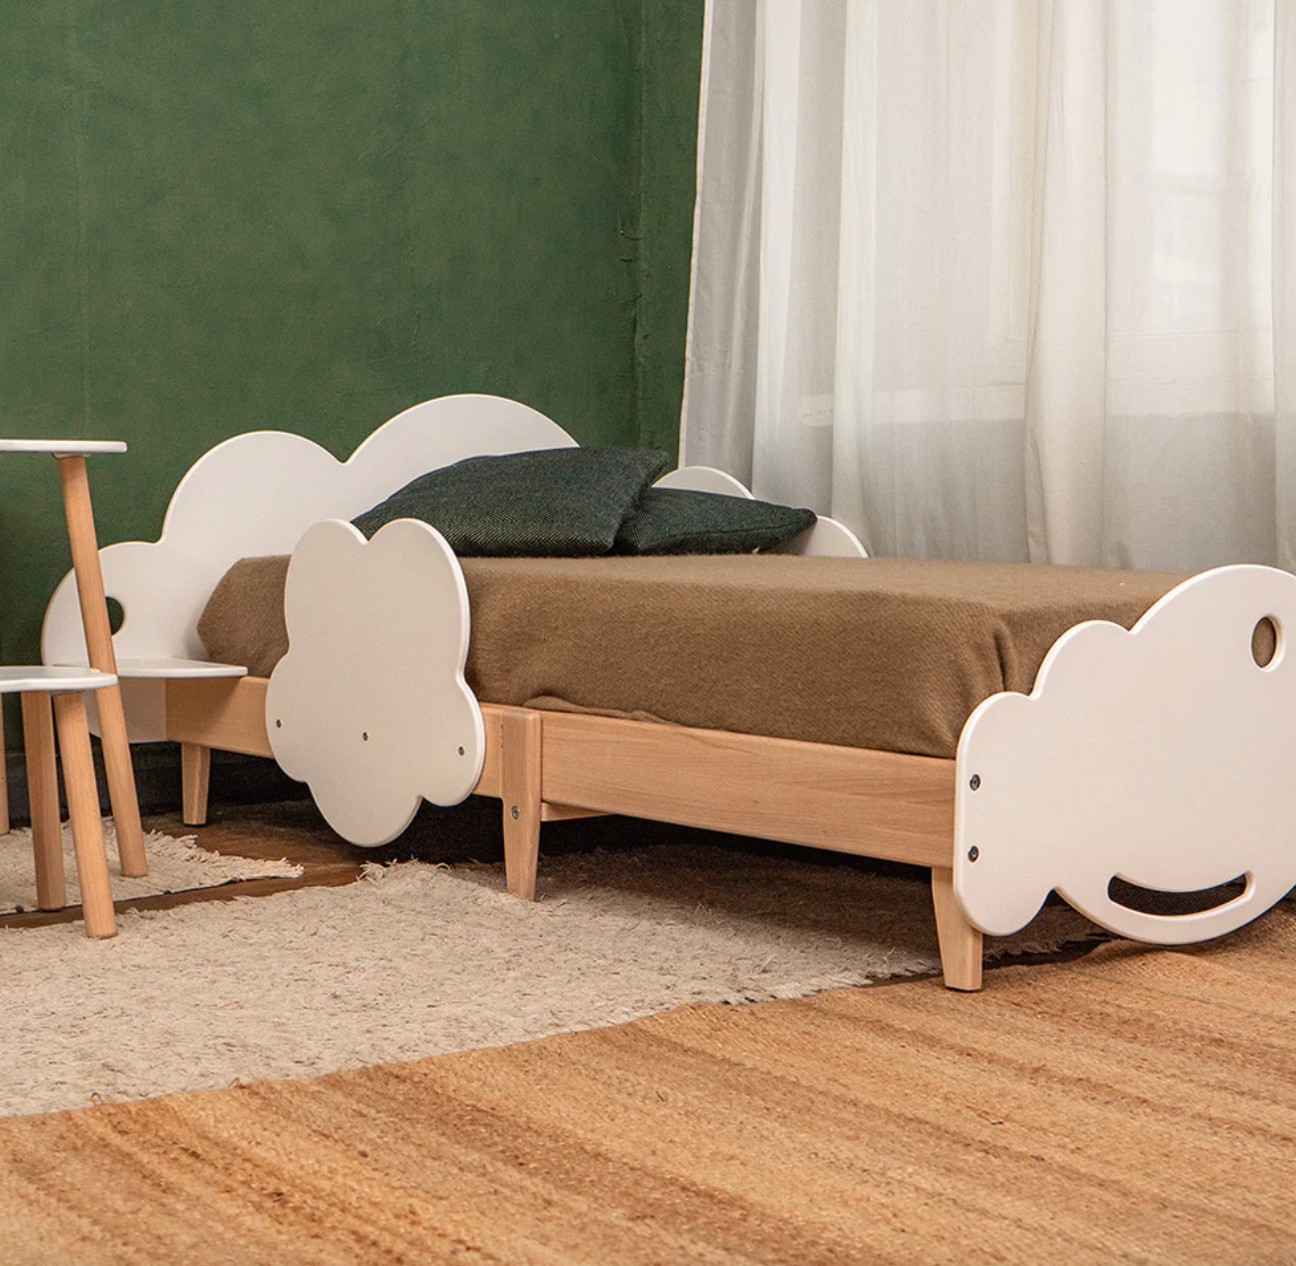 Dreamy Clouds: Toddler Wooden Floor Bed with Cloud Theme